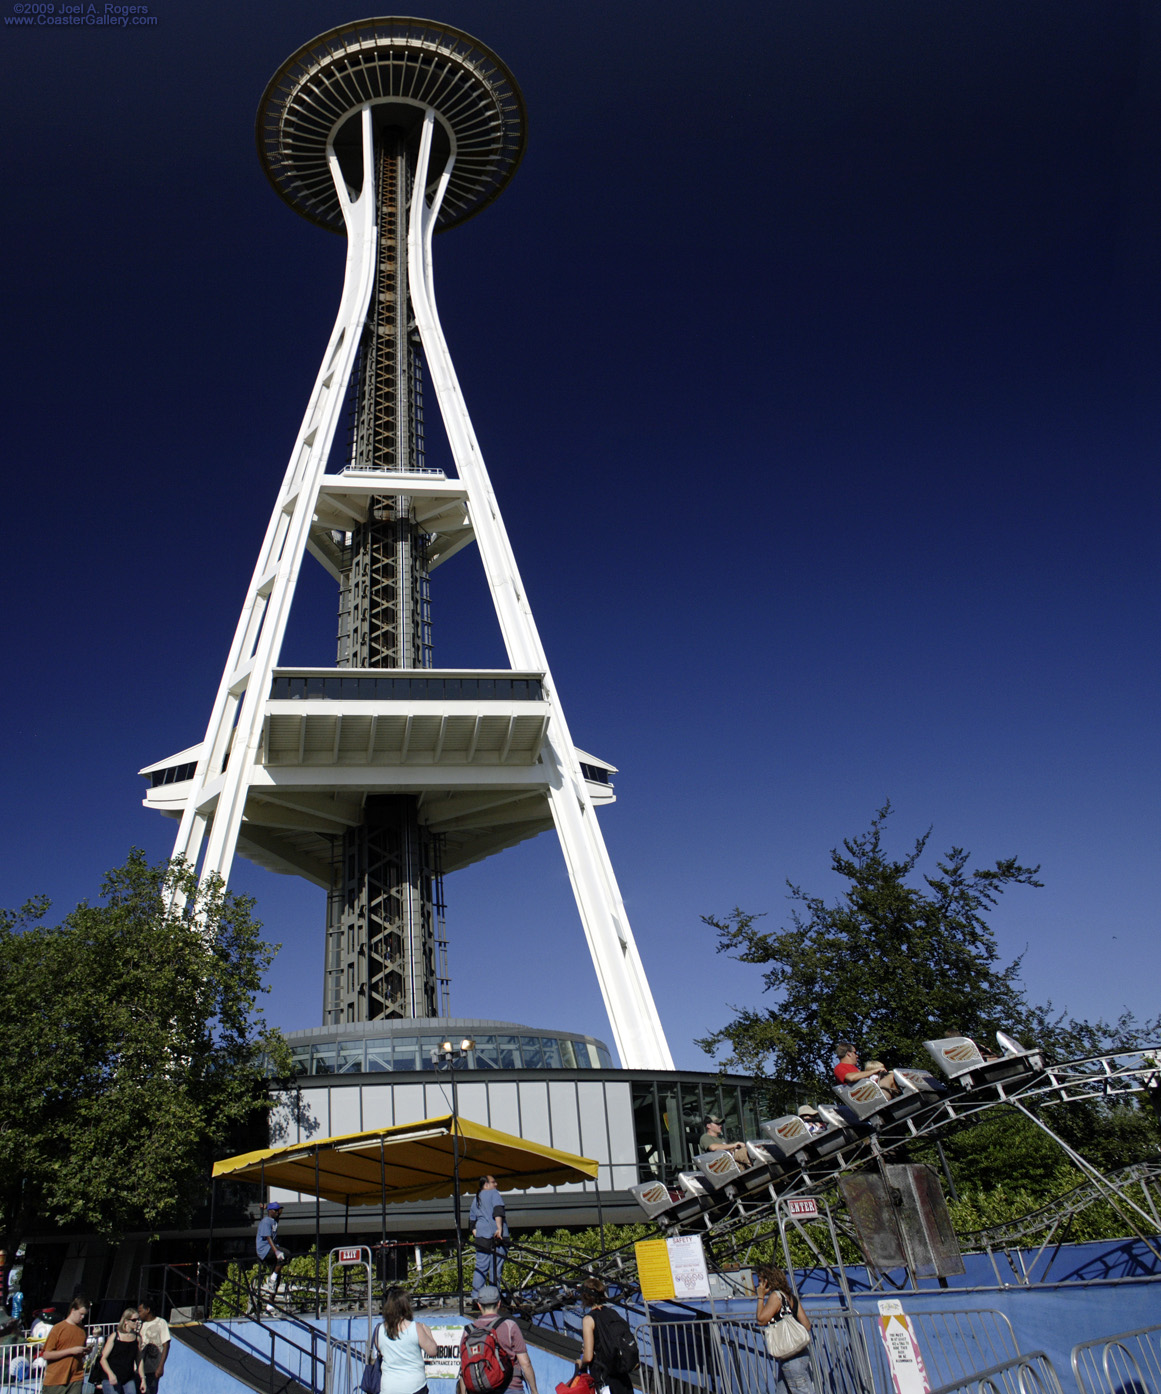 Rainbow Chaser roller coaster built by Schiff.  Located next to Experience Music Project and Seattle Space Needle.